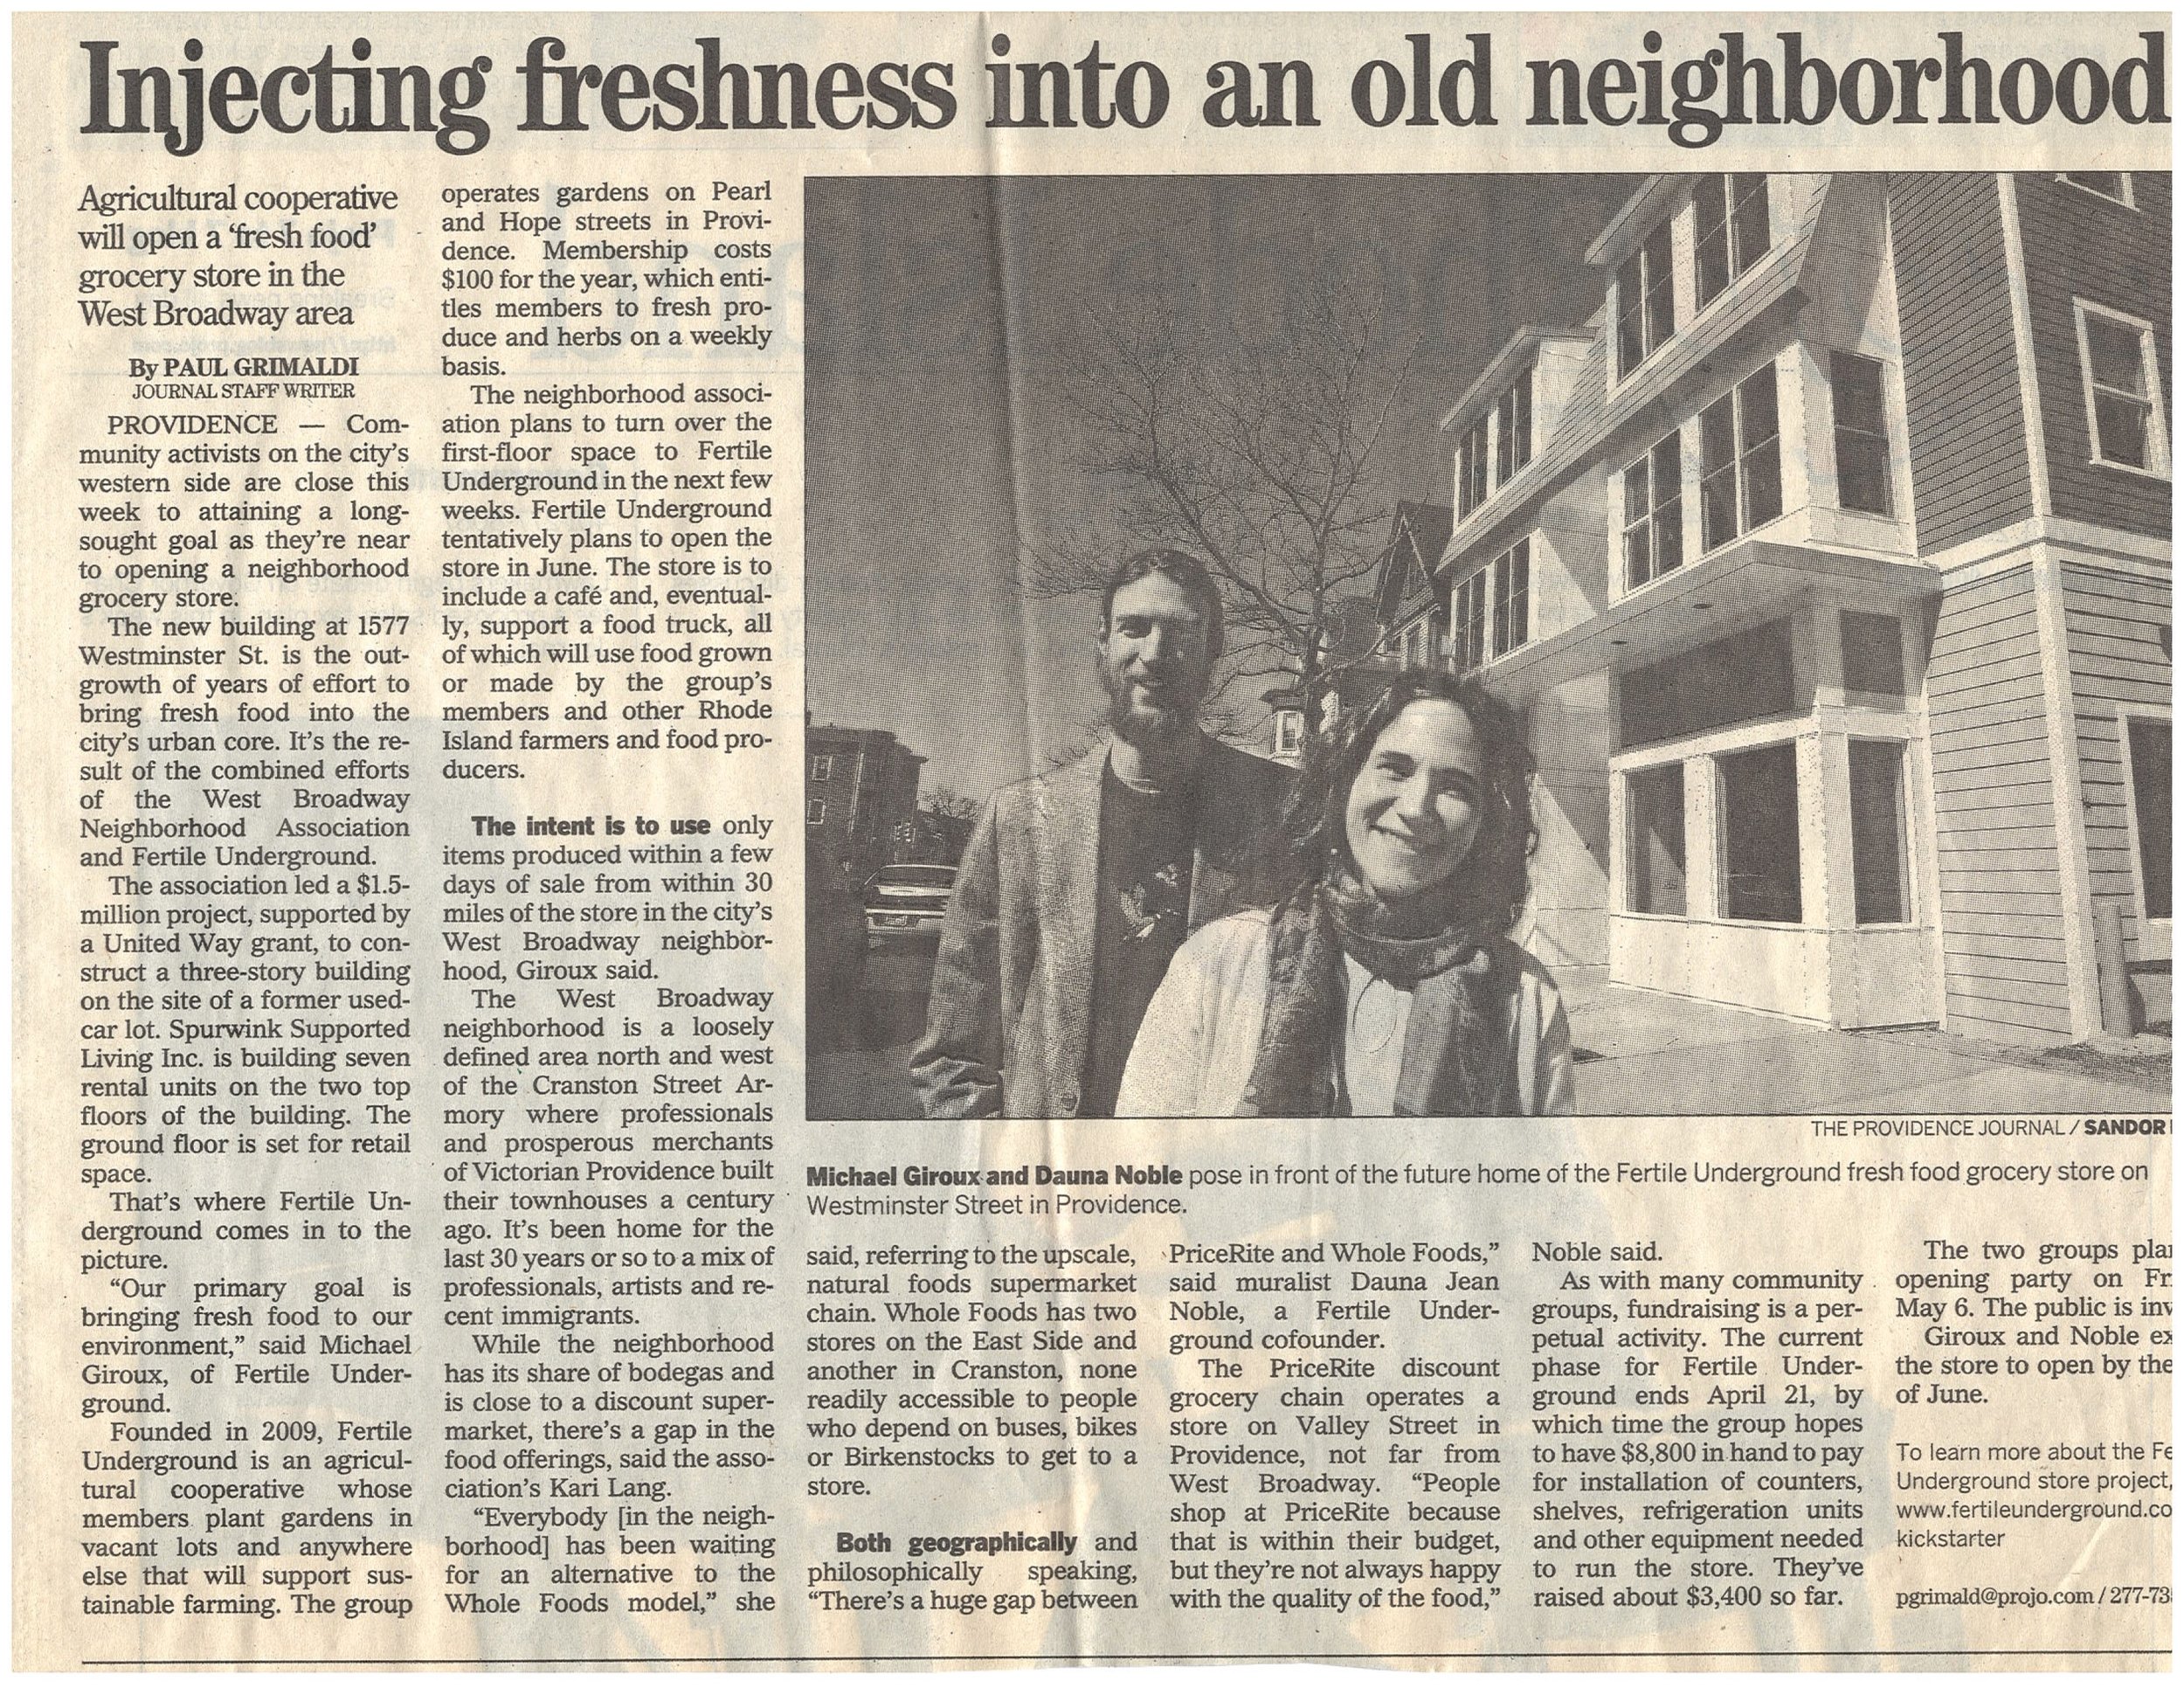  Providence Journal article, spring 2011 